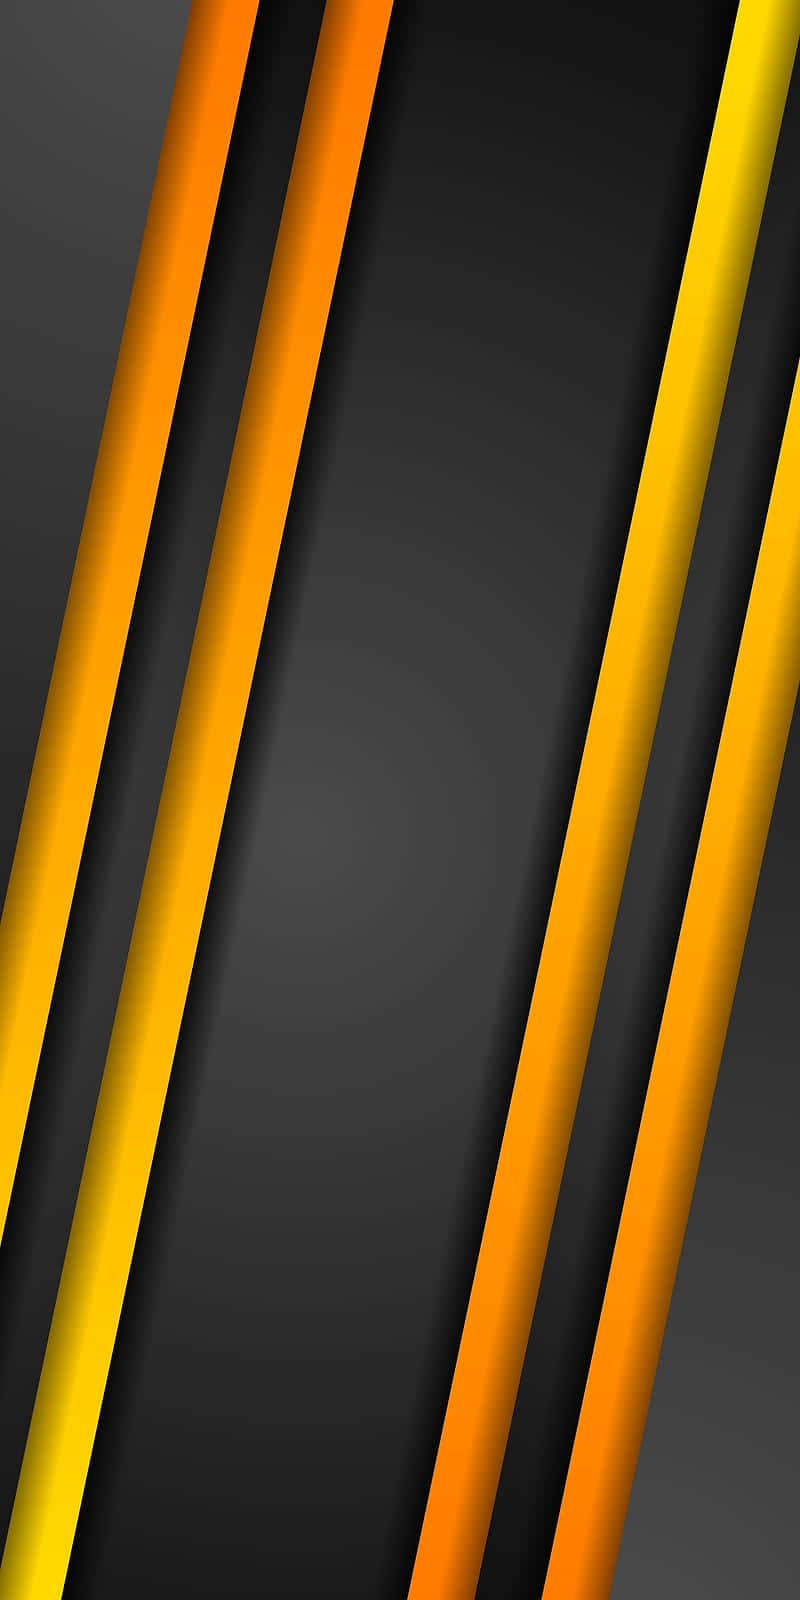 Abstract Black and Yellow Background